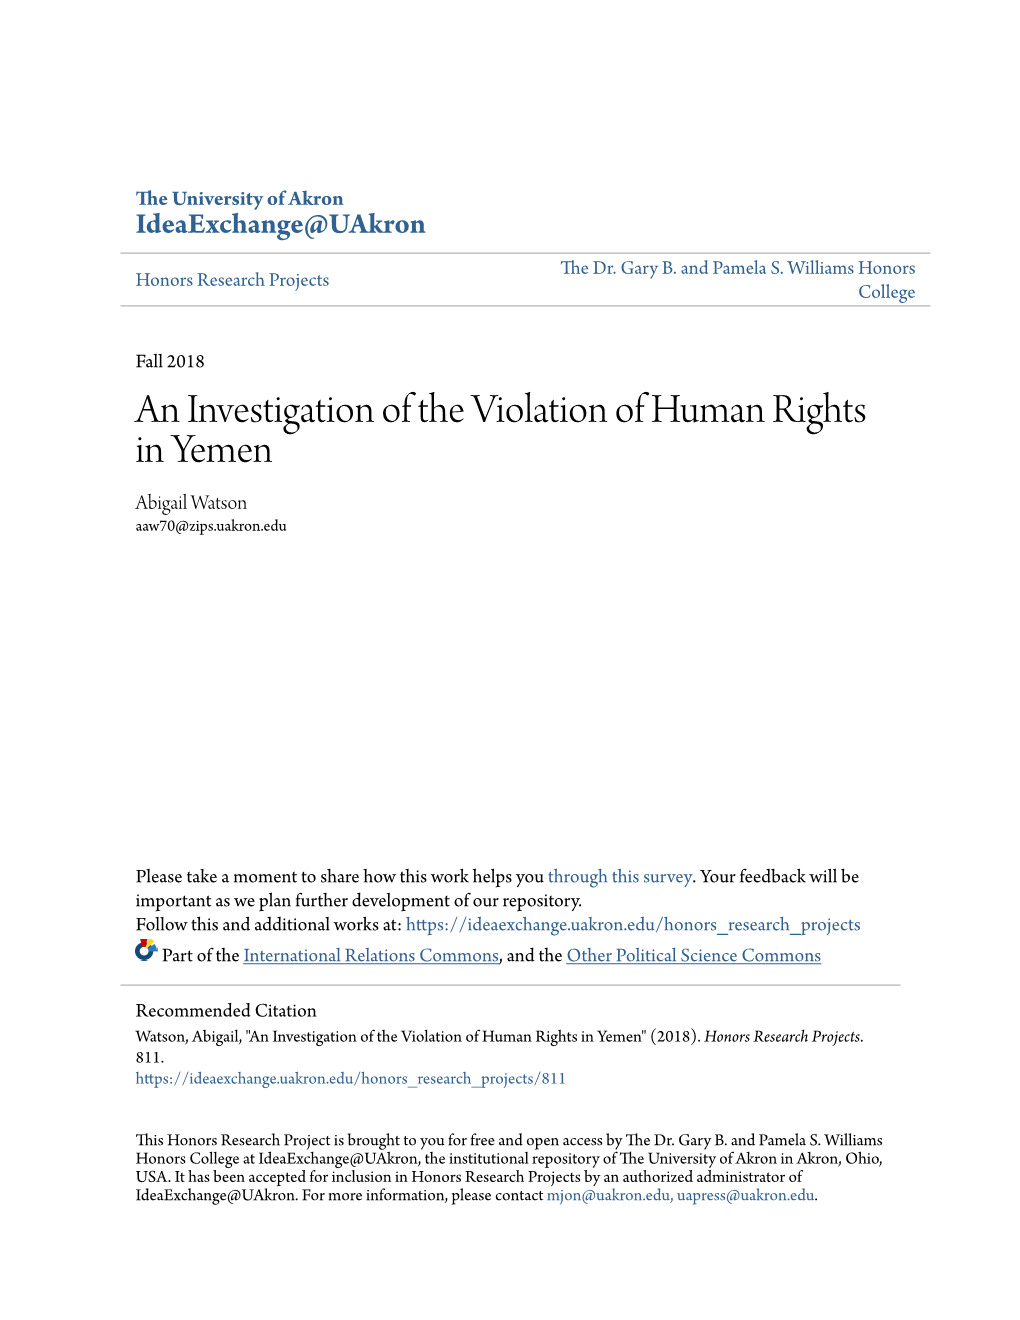 An Investigation of the Violation of Human Rights in Yemen Abigail Watson Aaw70@Zips.Uakron.Edu